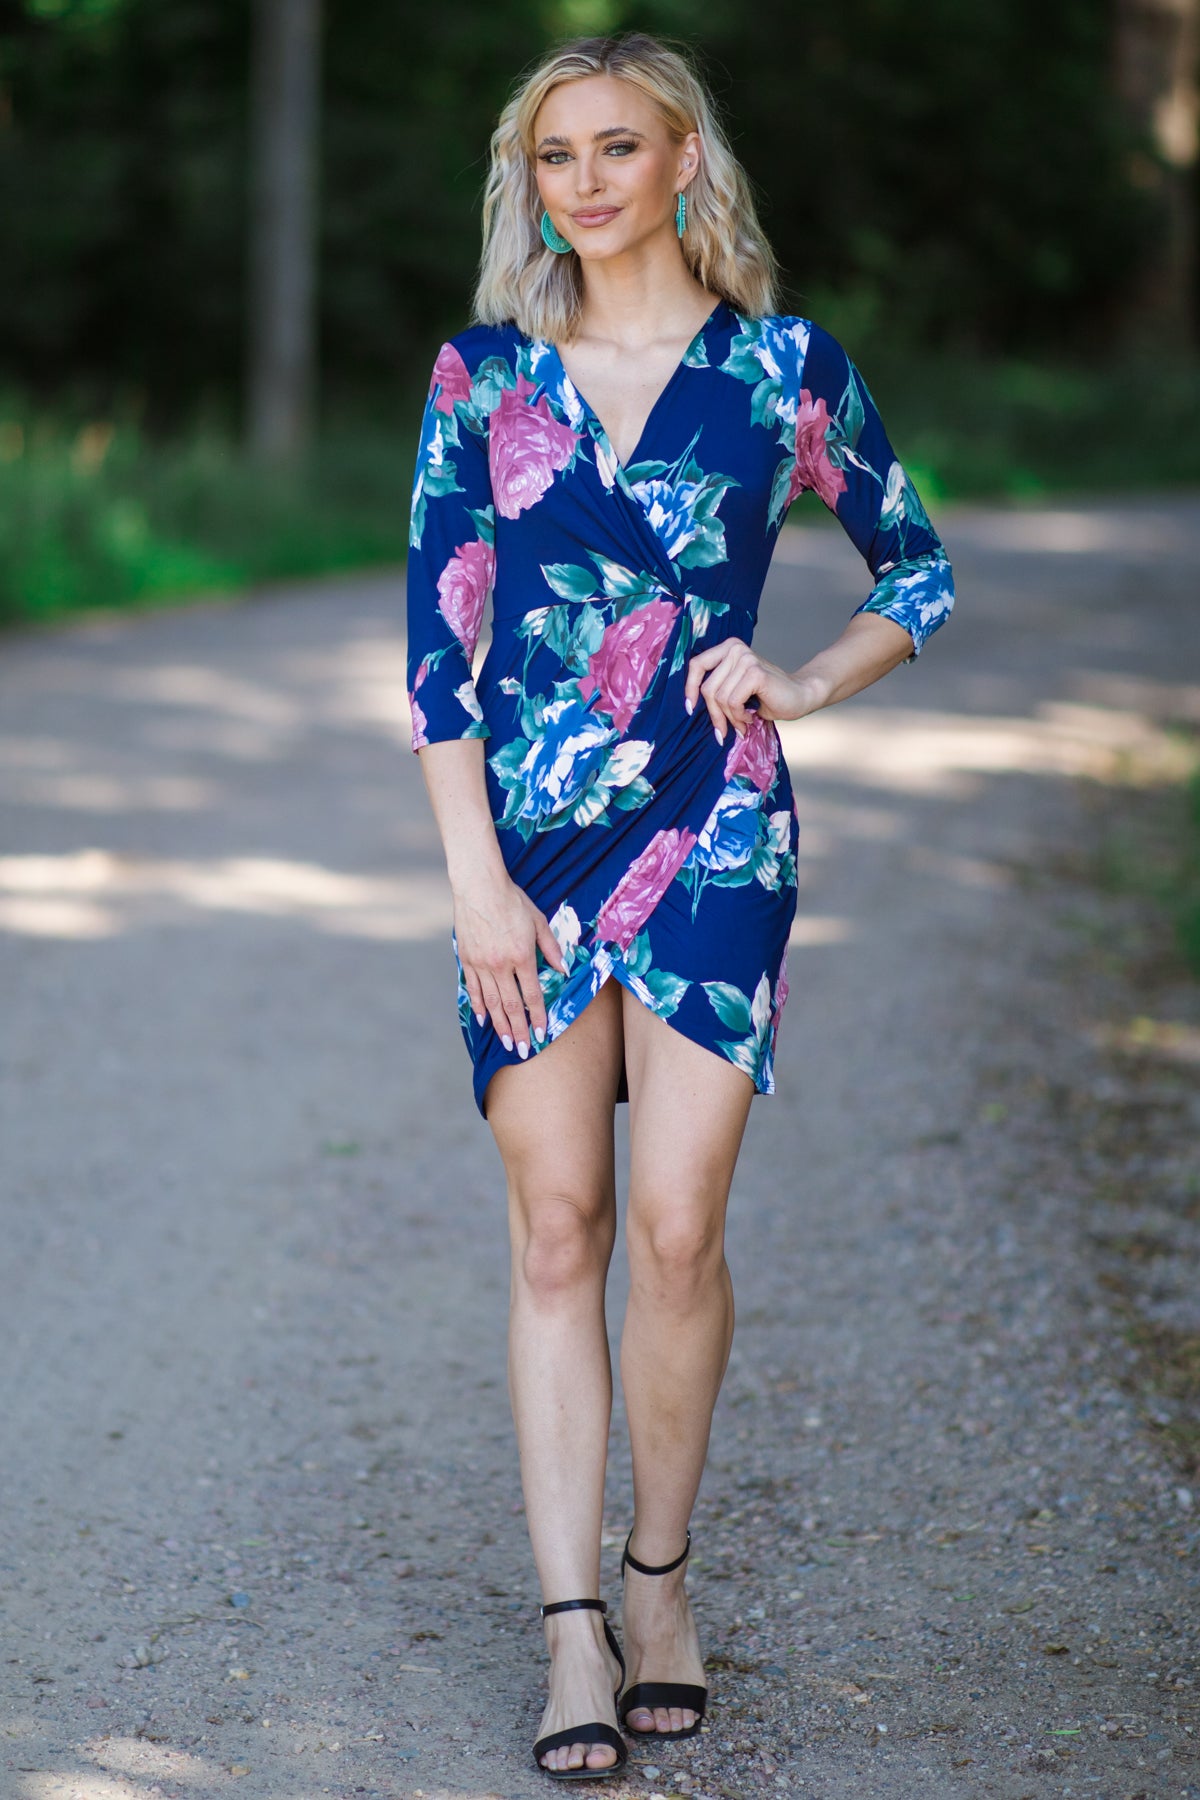 Navy and Dusty Rose Floral Print Dress · Filly Flair